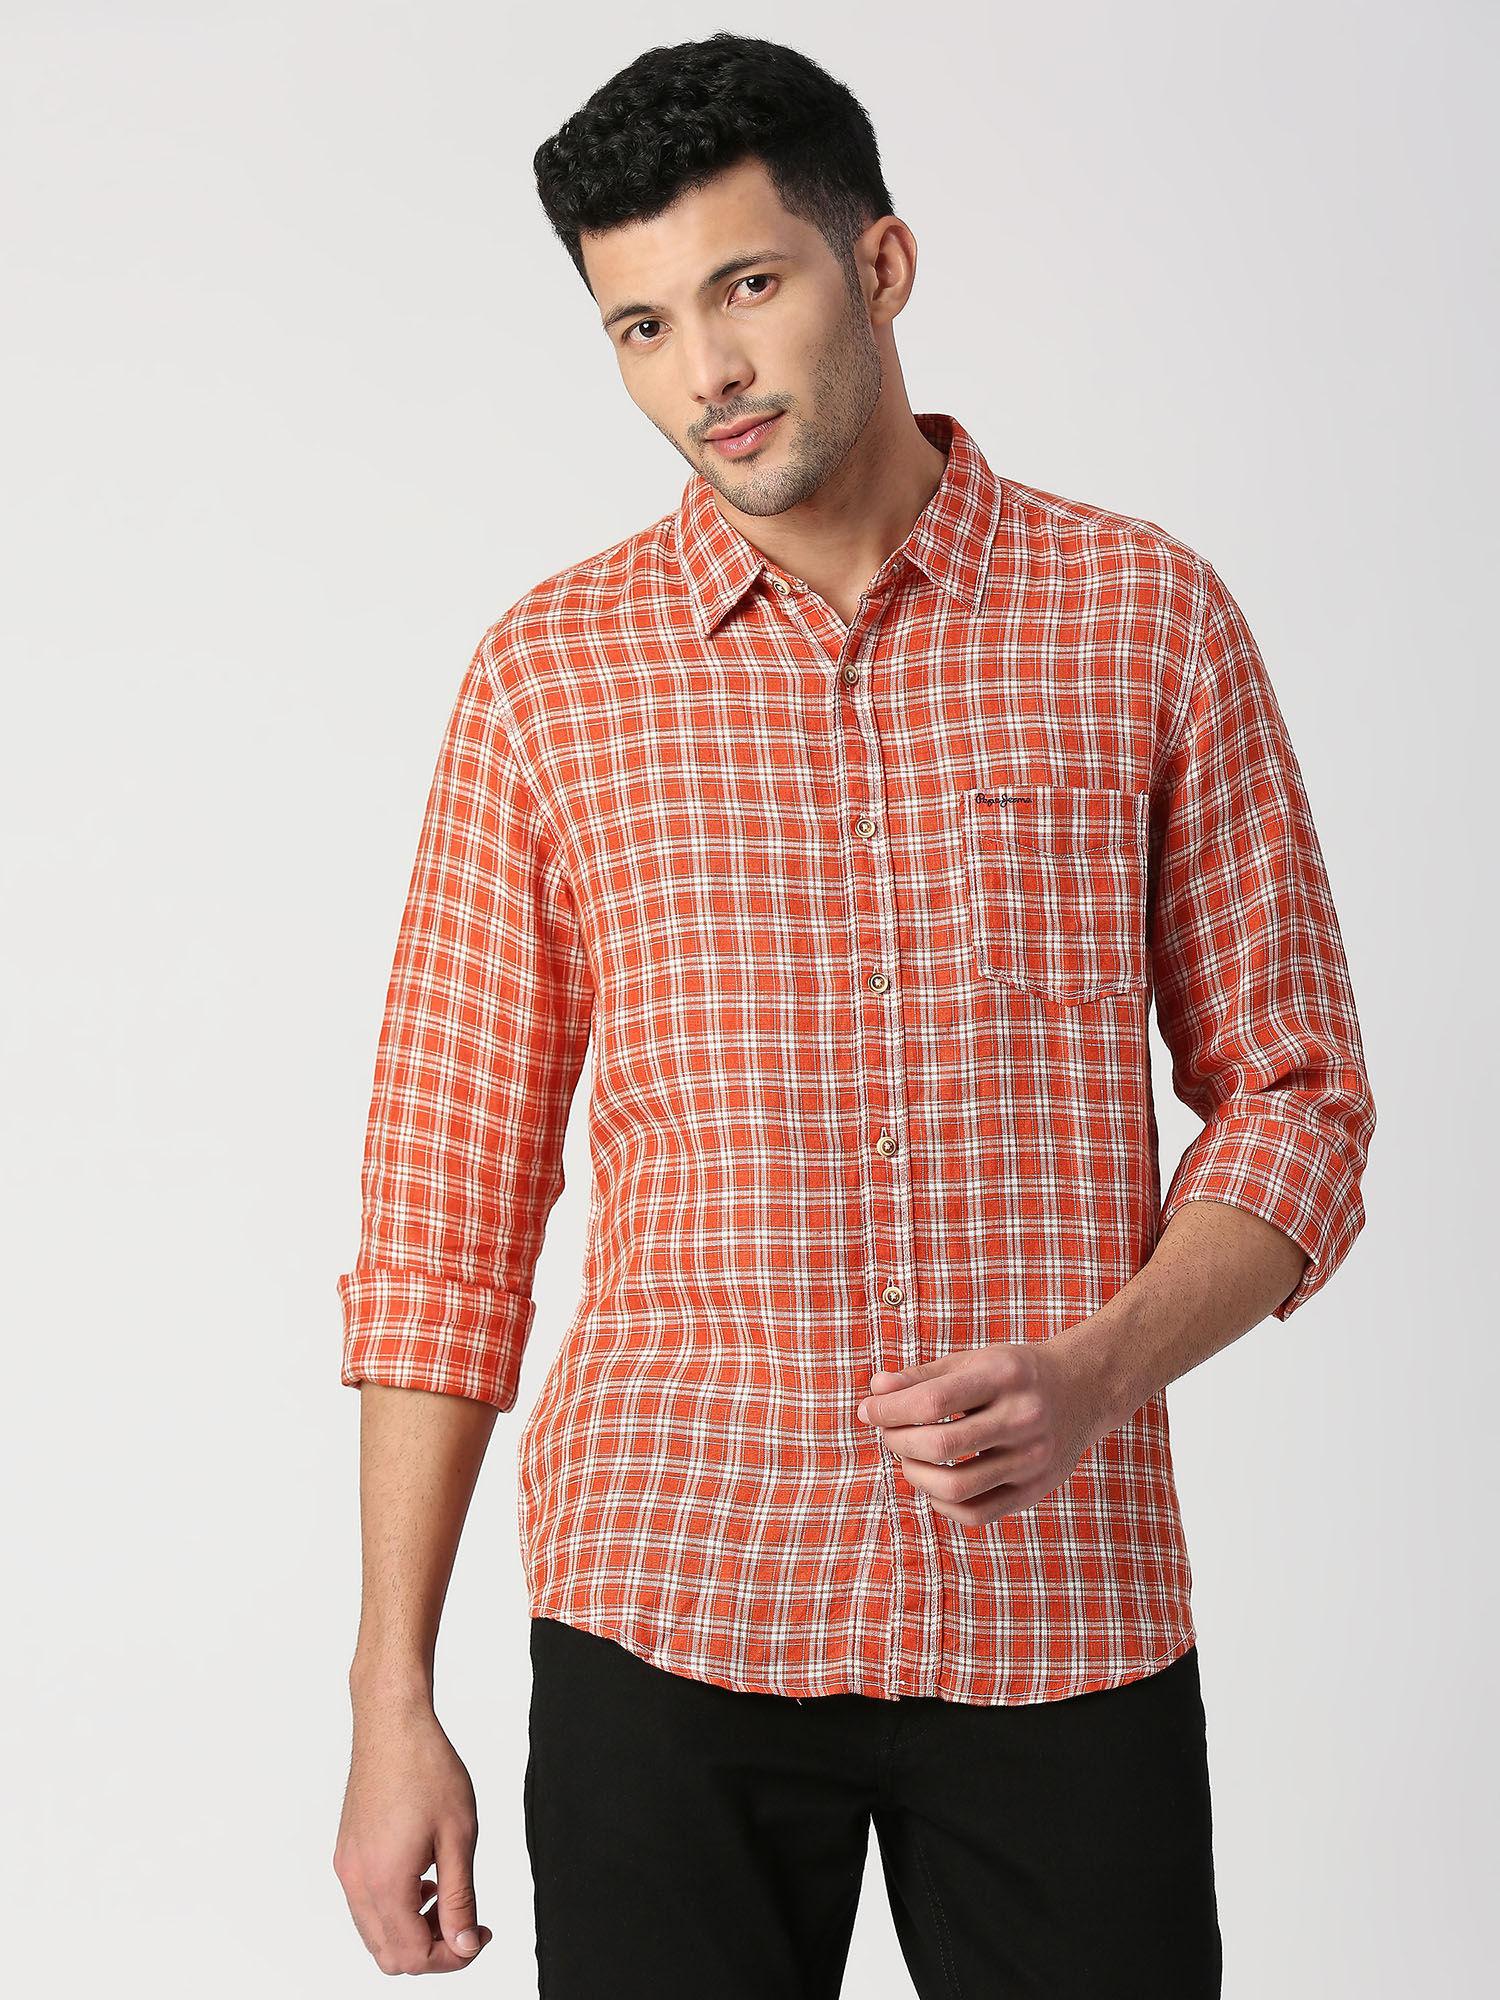 drown full sleeves pure linen check casual shirt